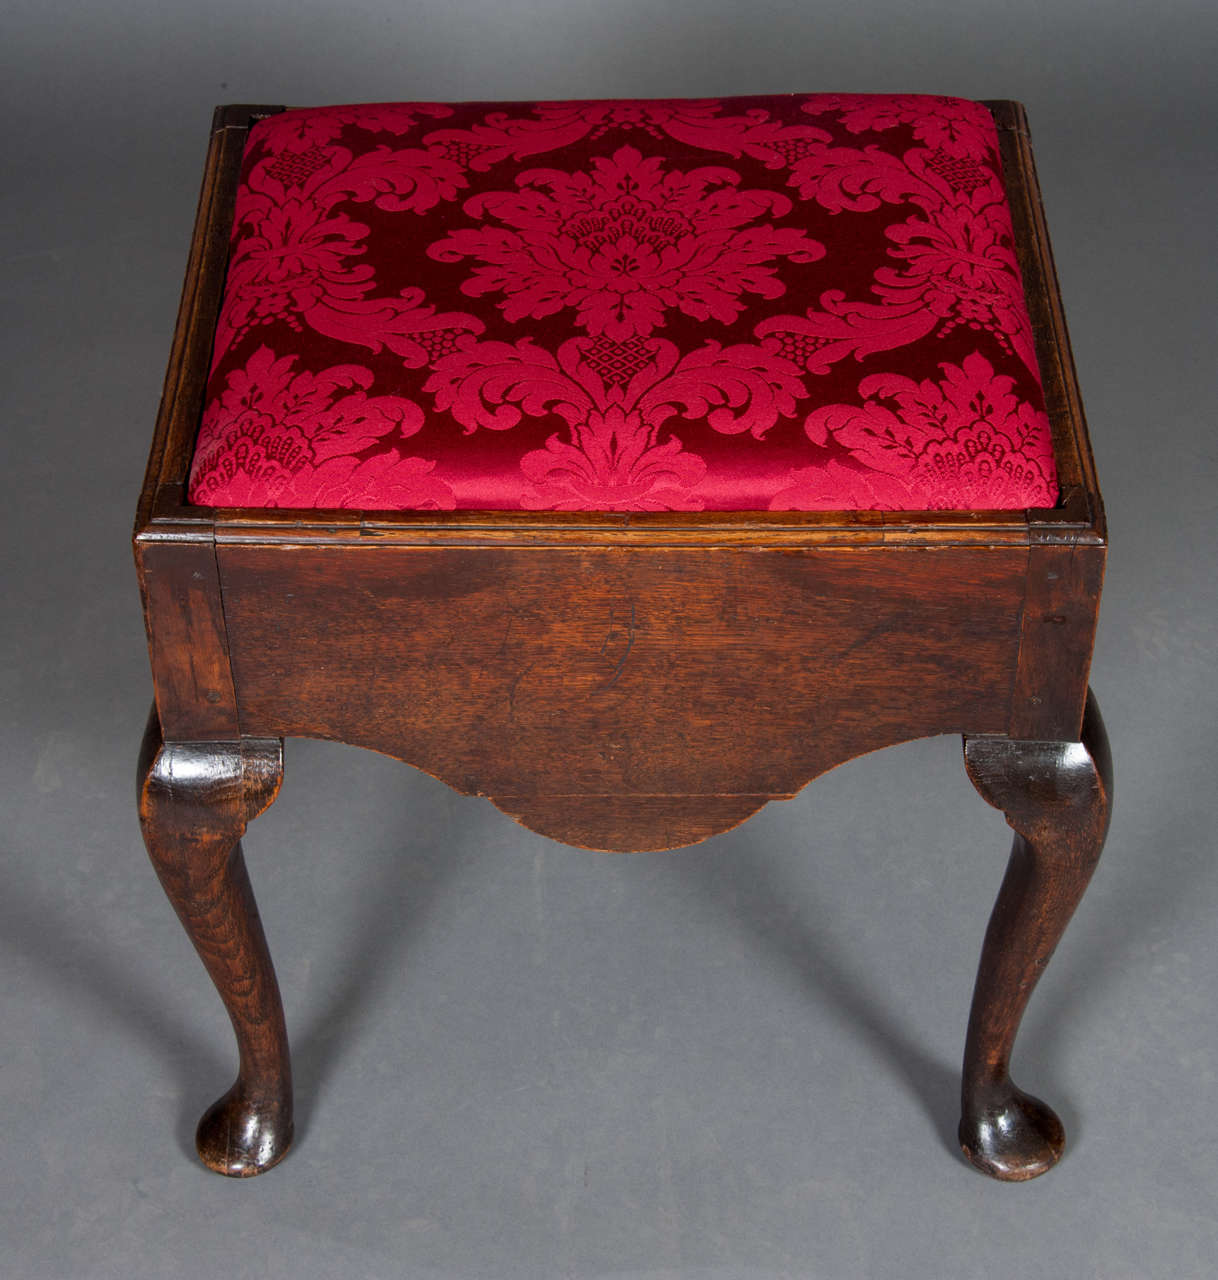 British Mid-18th Century Oak Dressing Stool with red damask covered drop-in seat